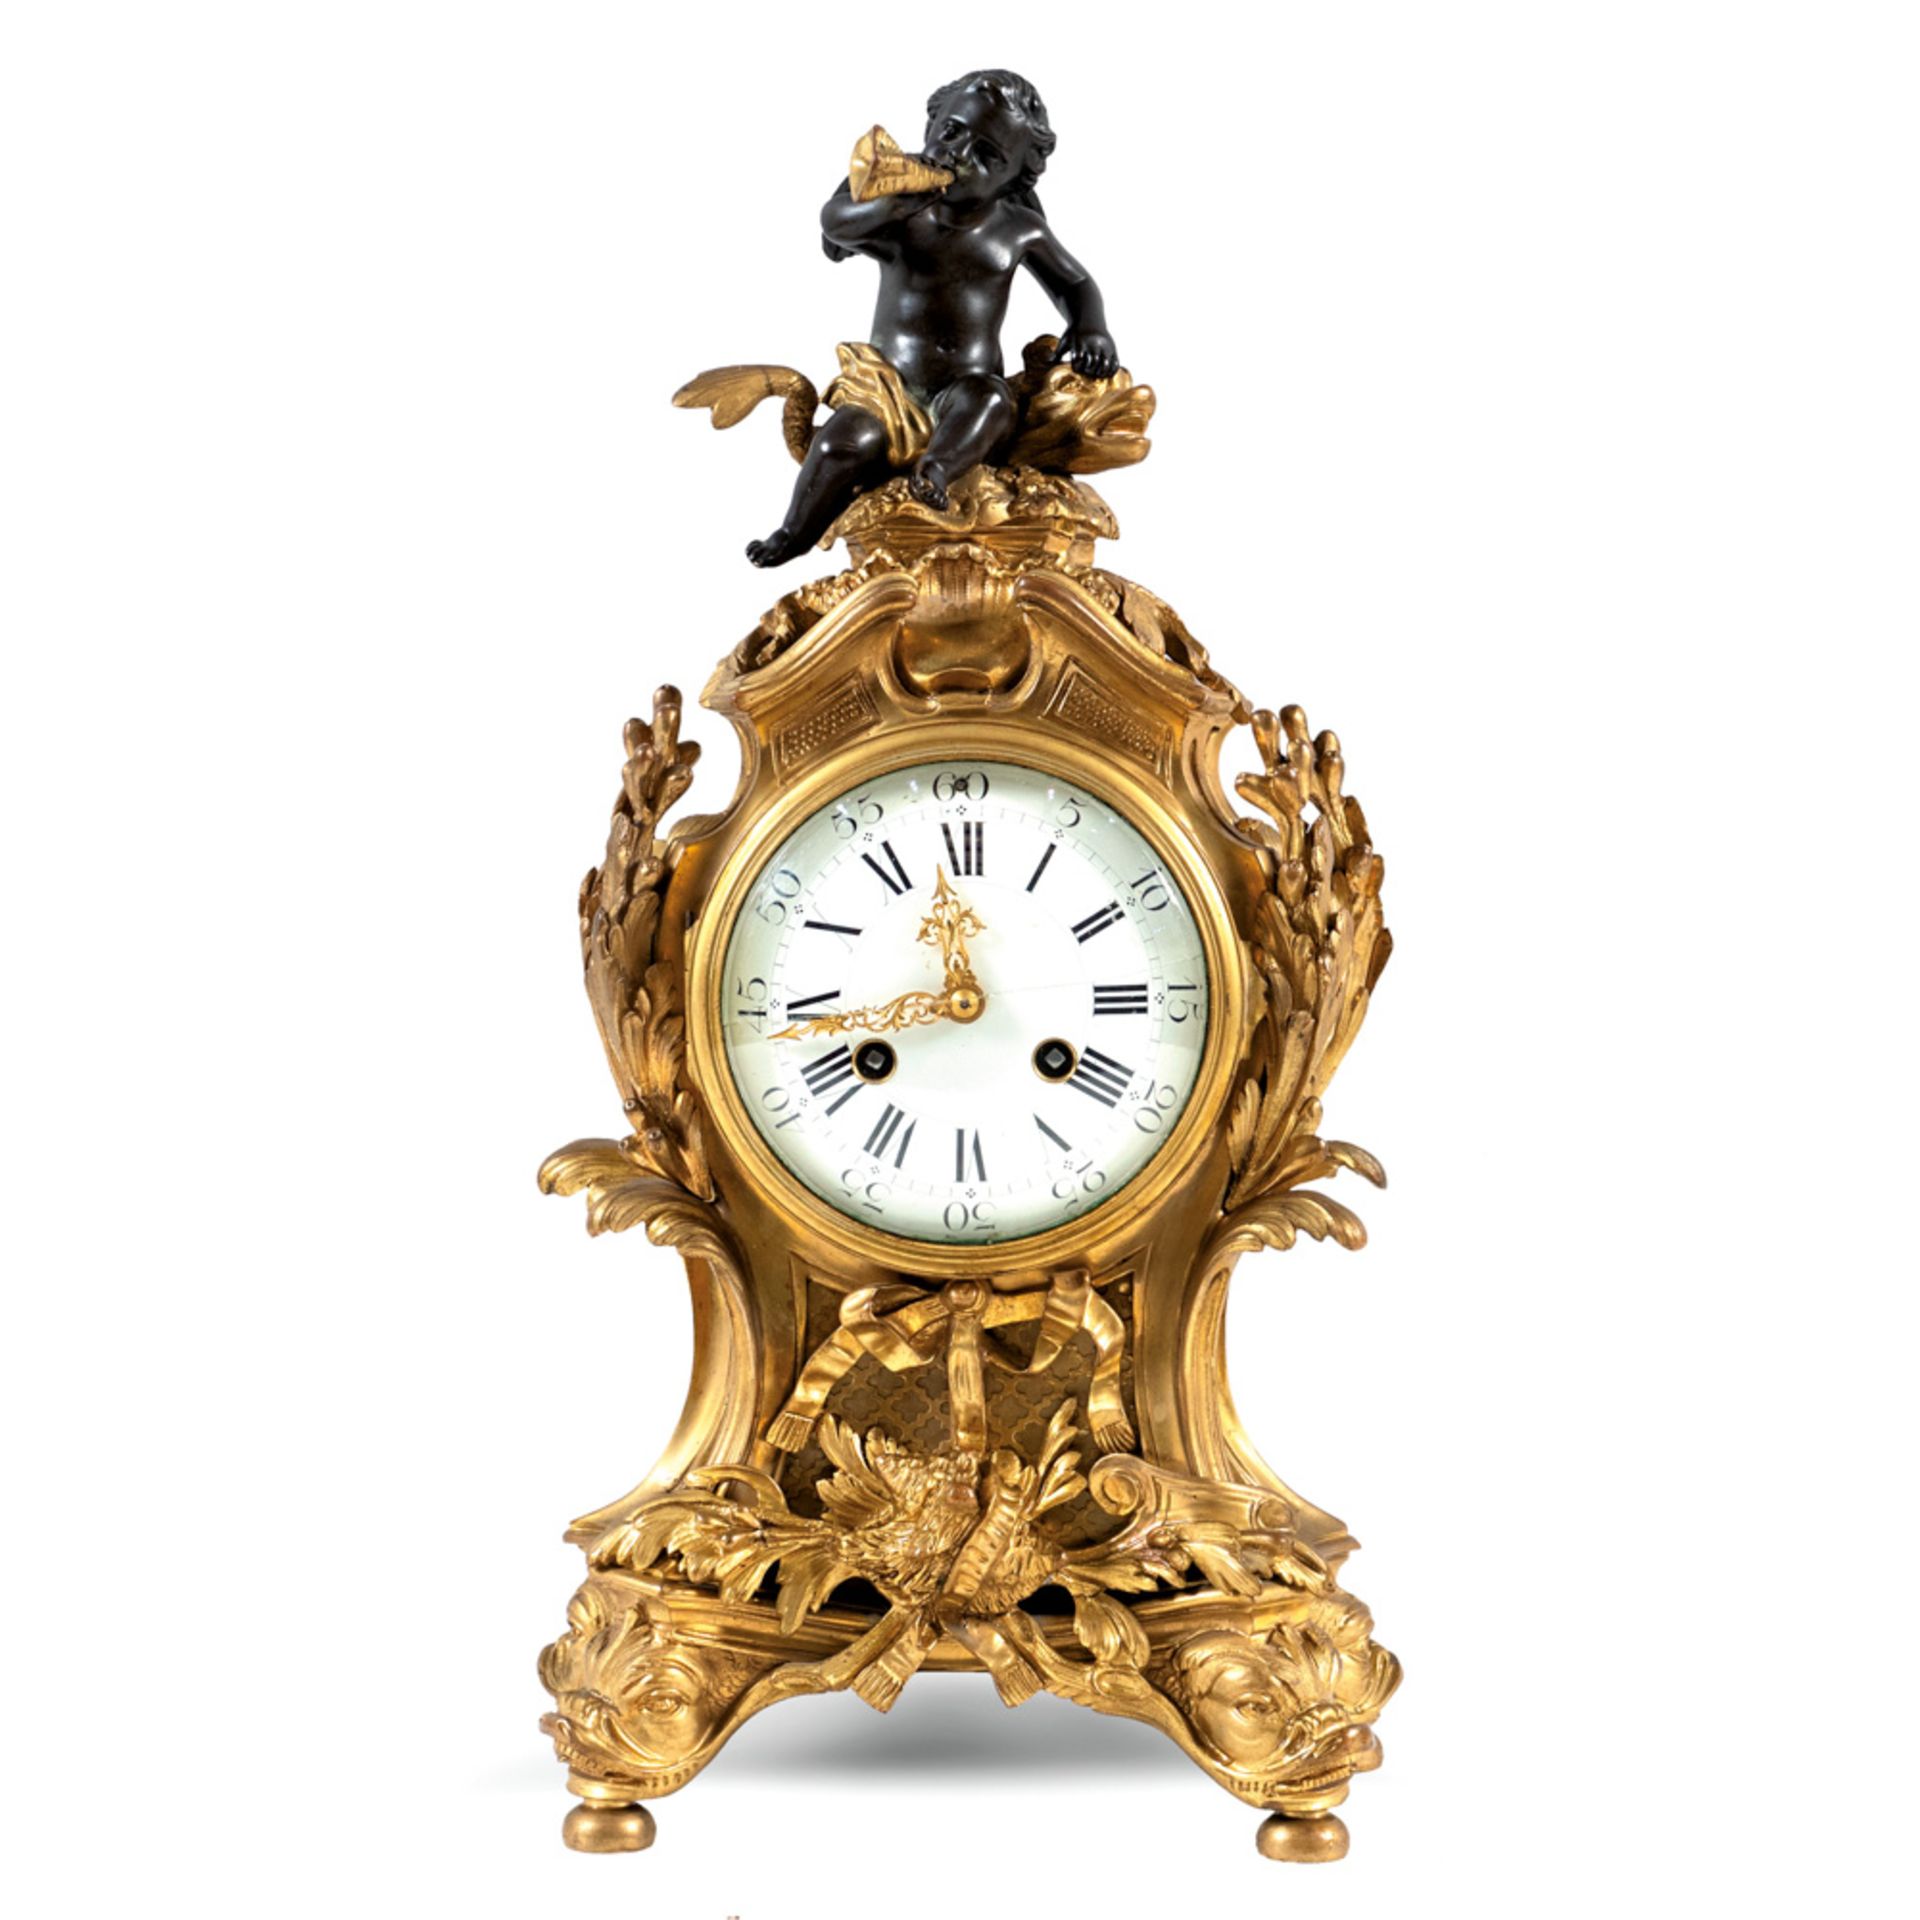 Burnished and golden bronze table clock